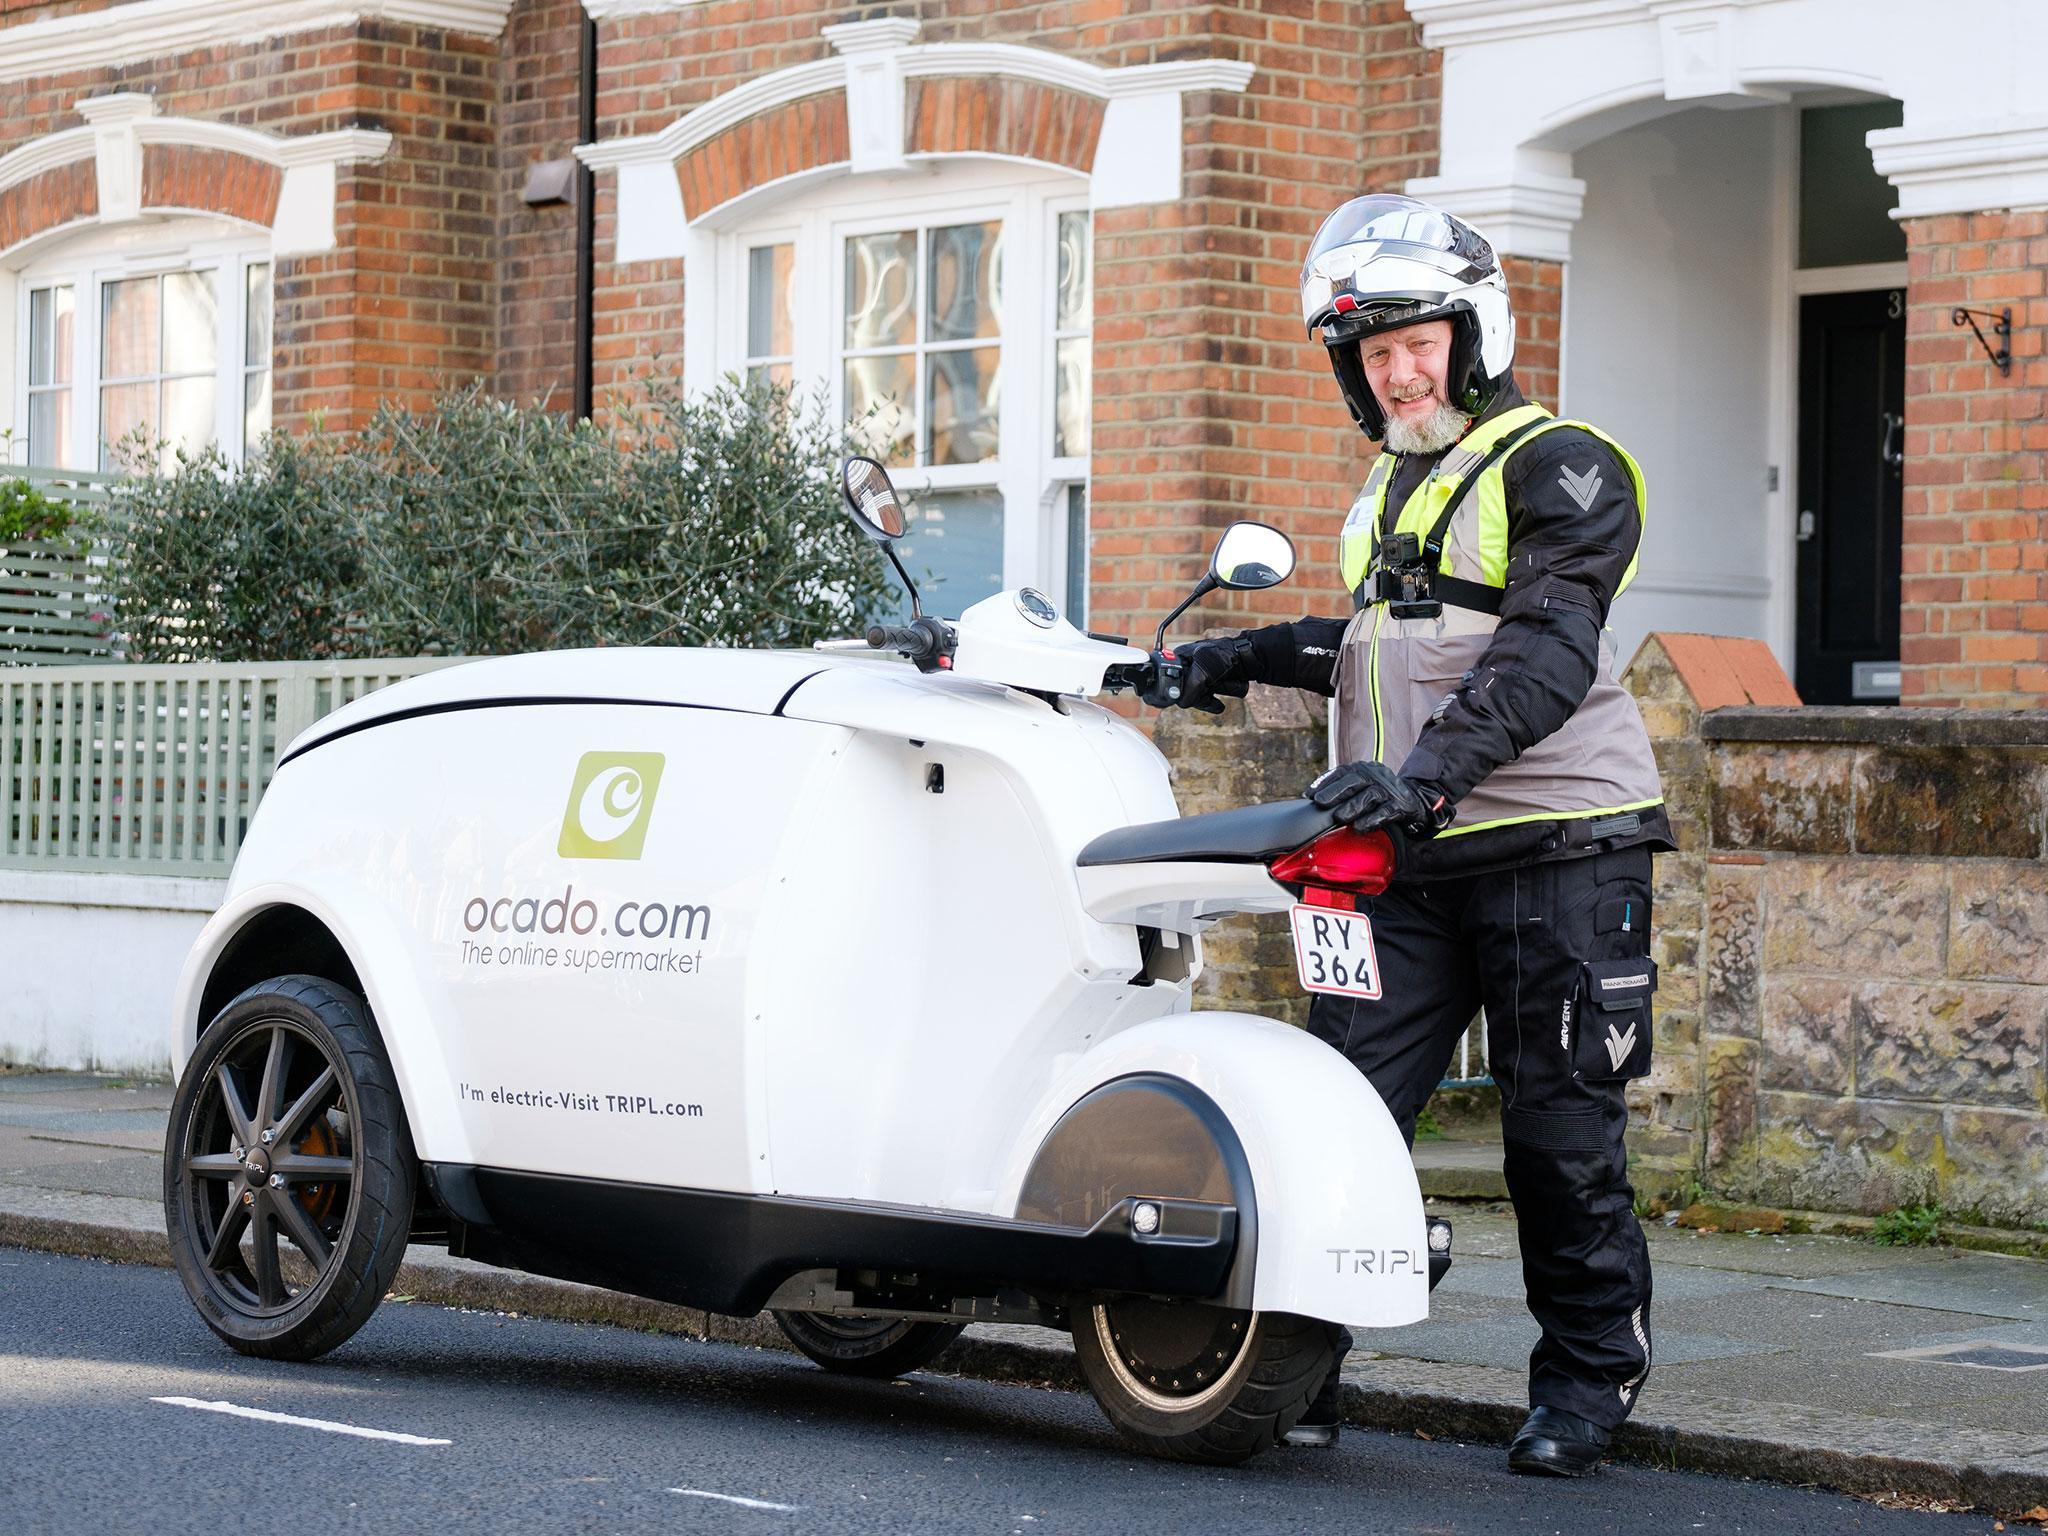 Ocado has suffered from a shortage of drivers